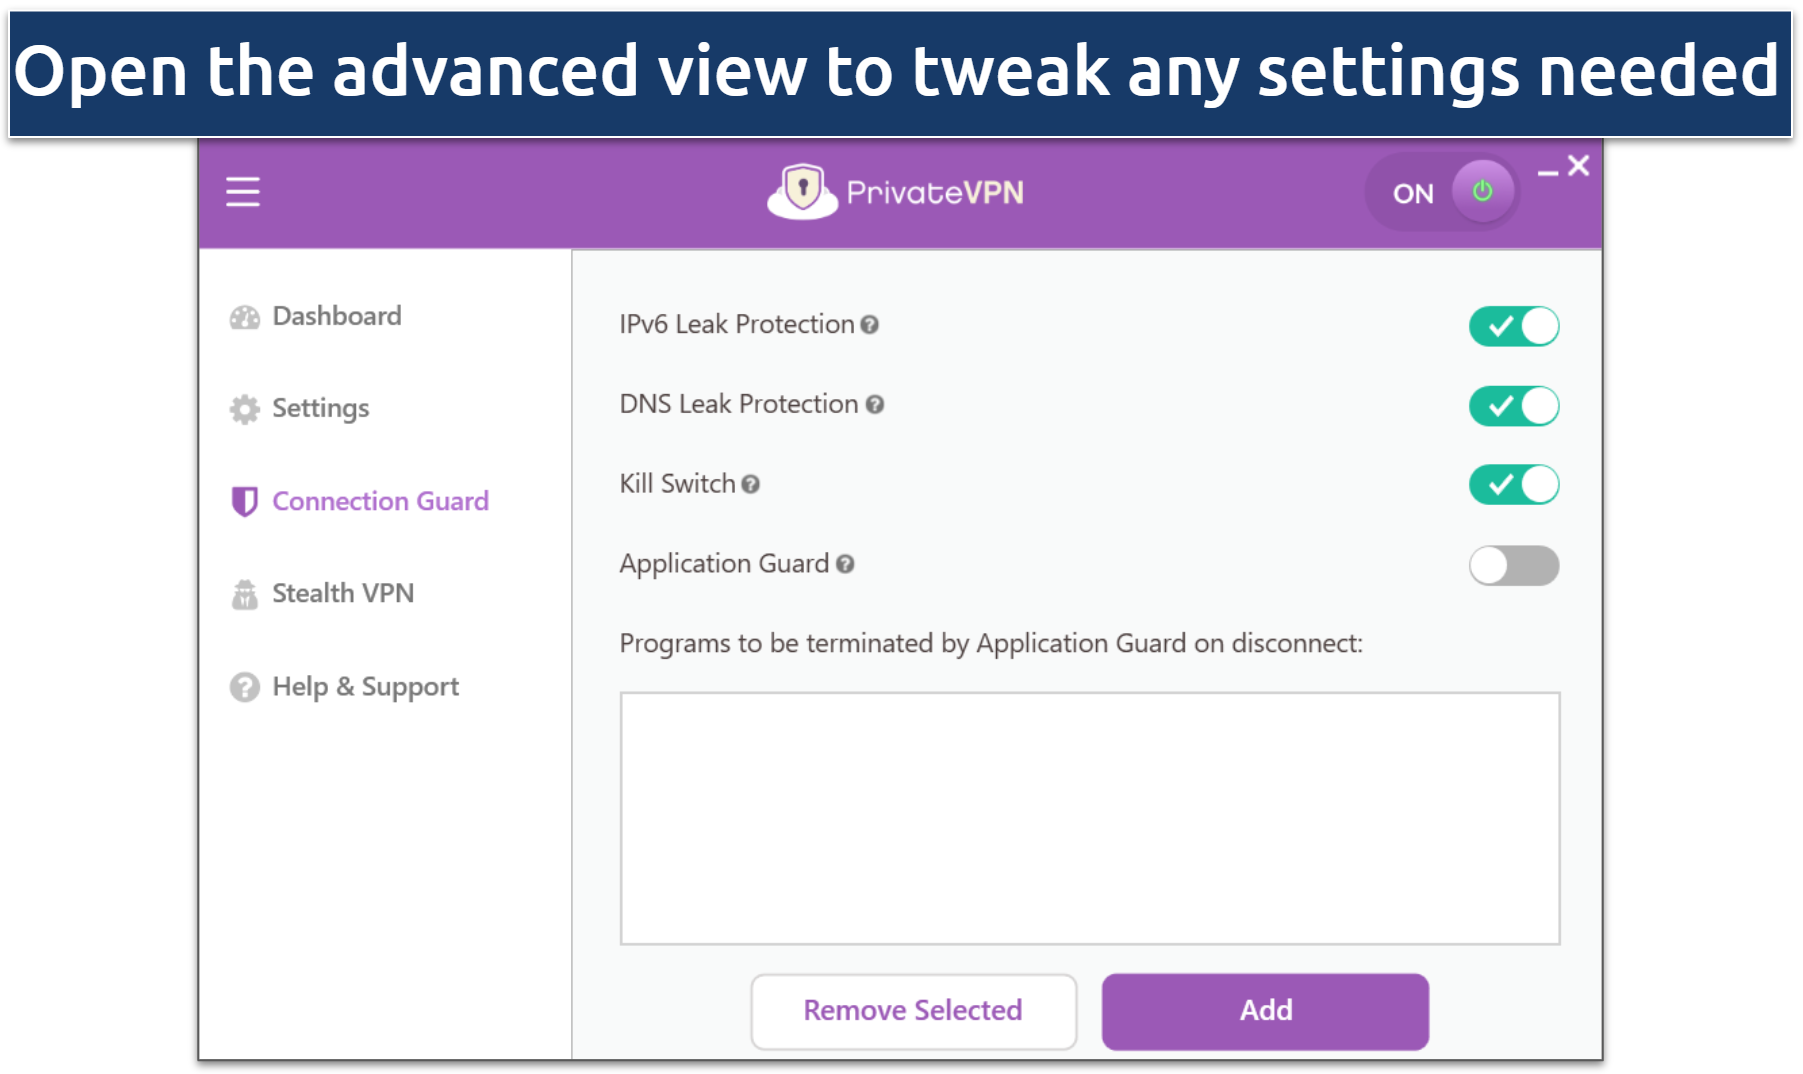 A screenshot of PrivateVPN's dashboard showing how to access its advanced security features